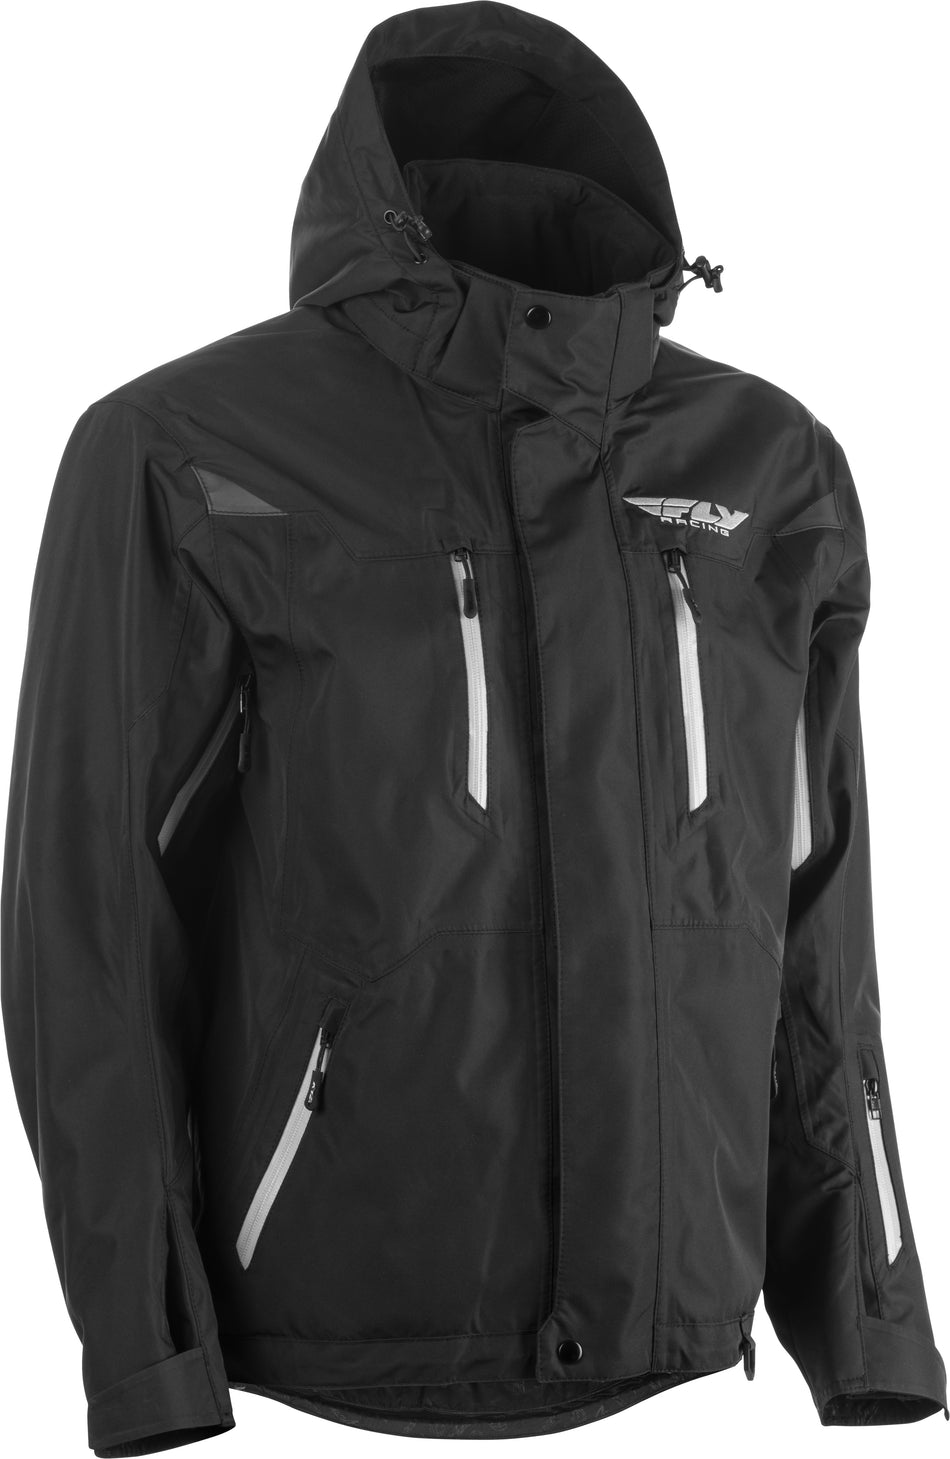 FLY RACING Fly Incline Jacket Black Sm 470-4100S